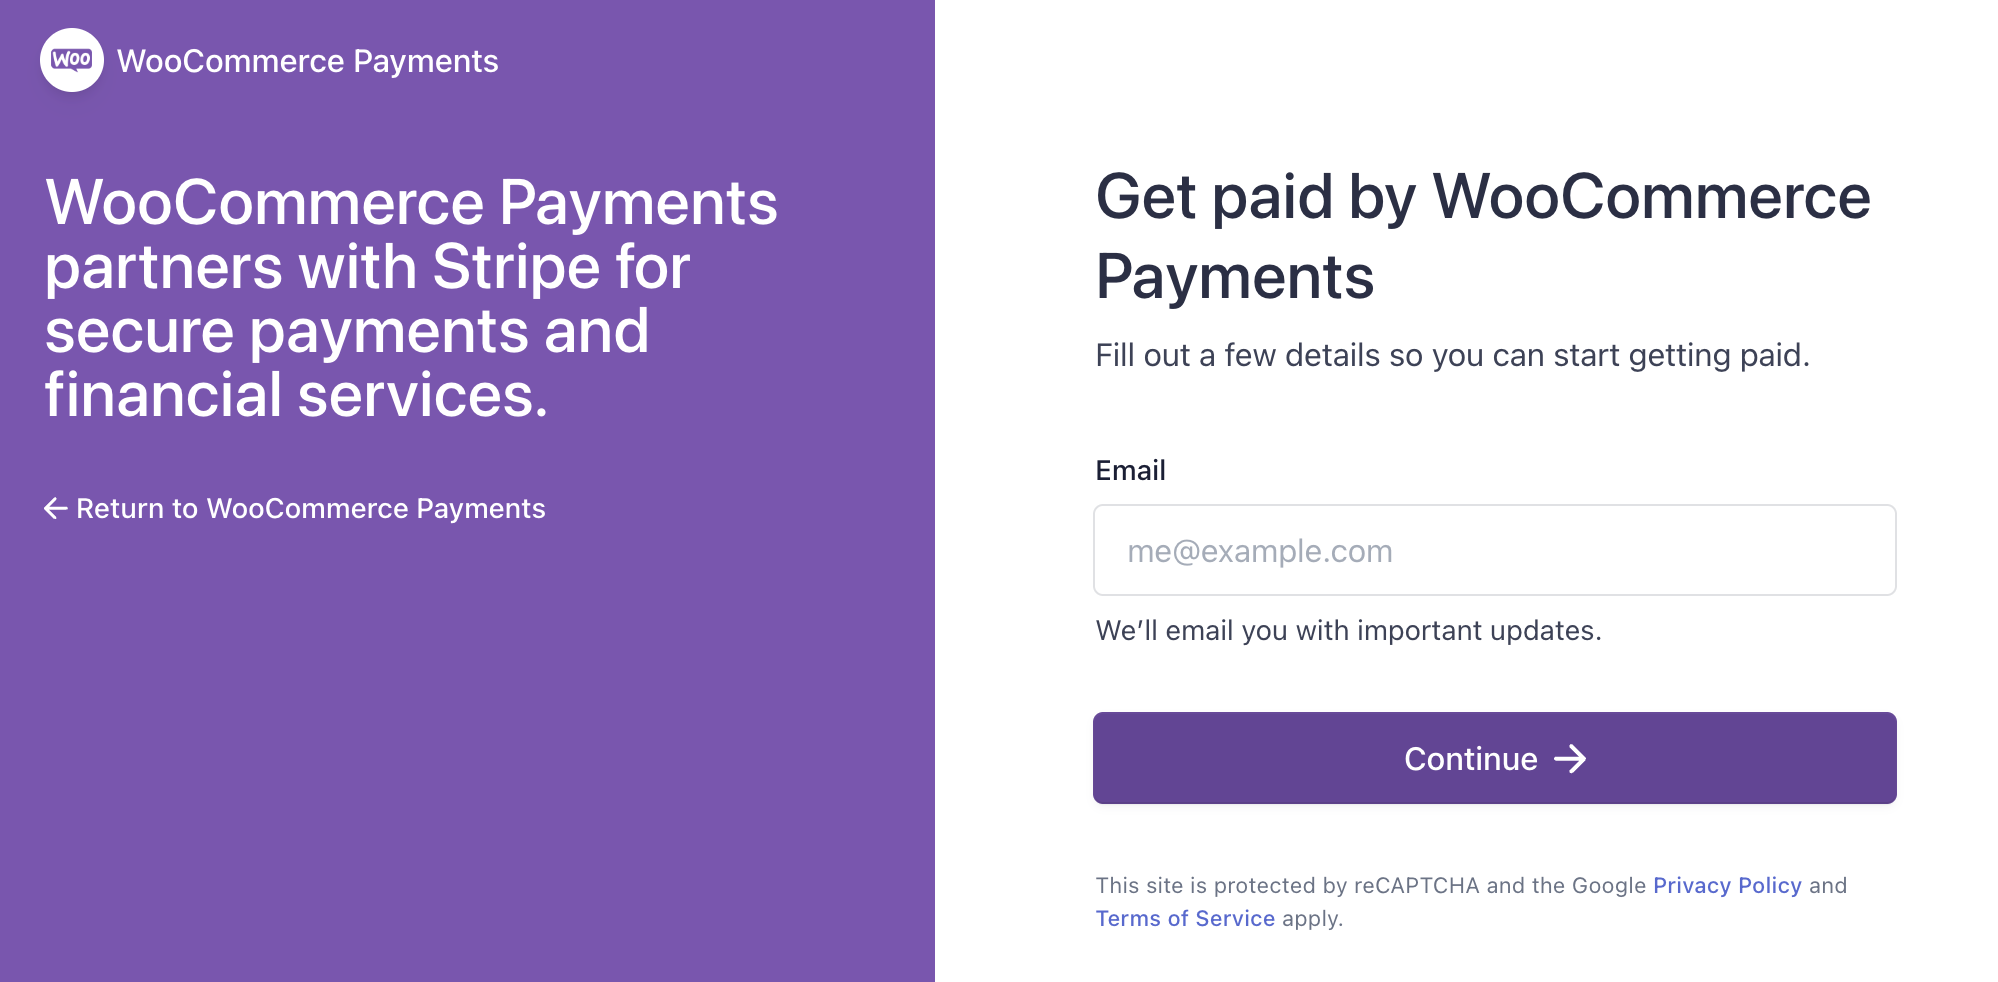 Woocommerce Payments Startup Guide Woocommerce 8543